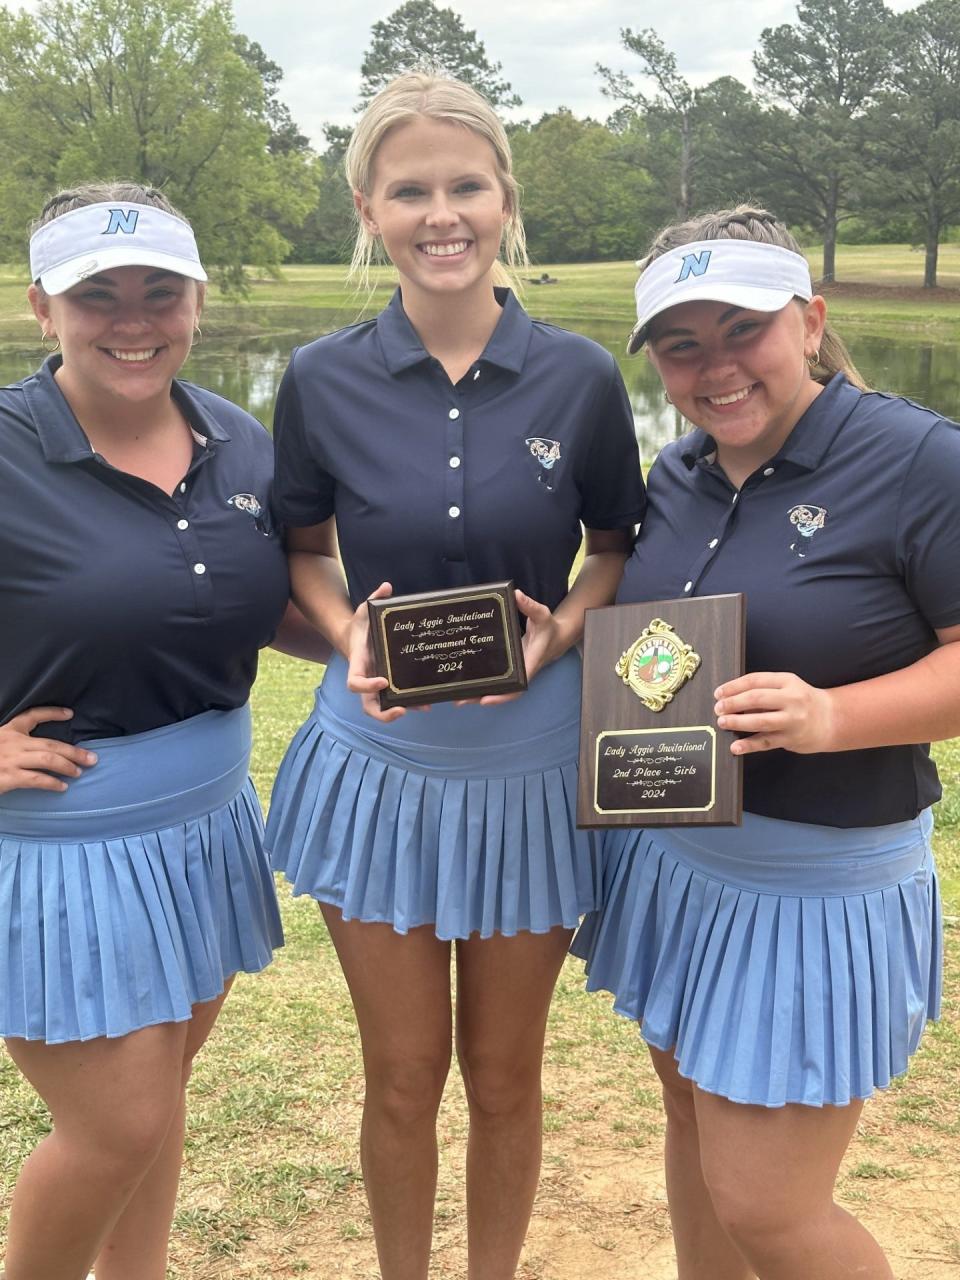 Anna Perdue (left), Lucy Lunceford (middle) and Allie Perdue (right) of the Northside High School girls golf team following their second-place finish in the Aggie Invitational Tournament at Sylacauga Country Club.